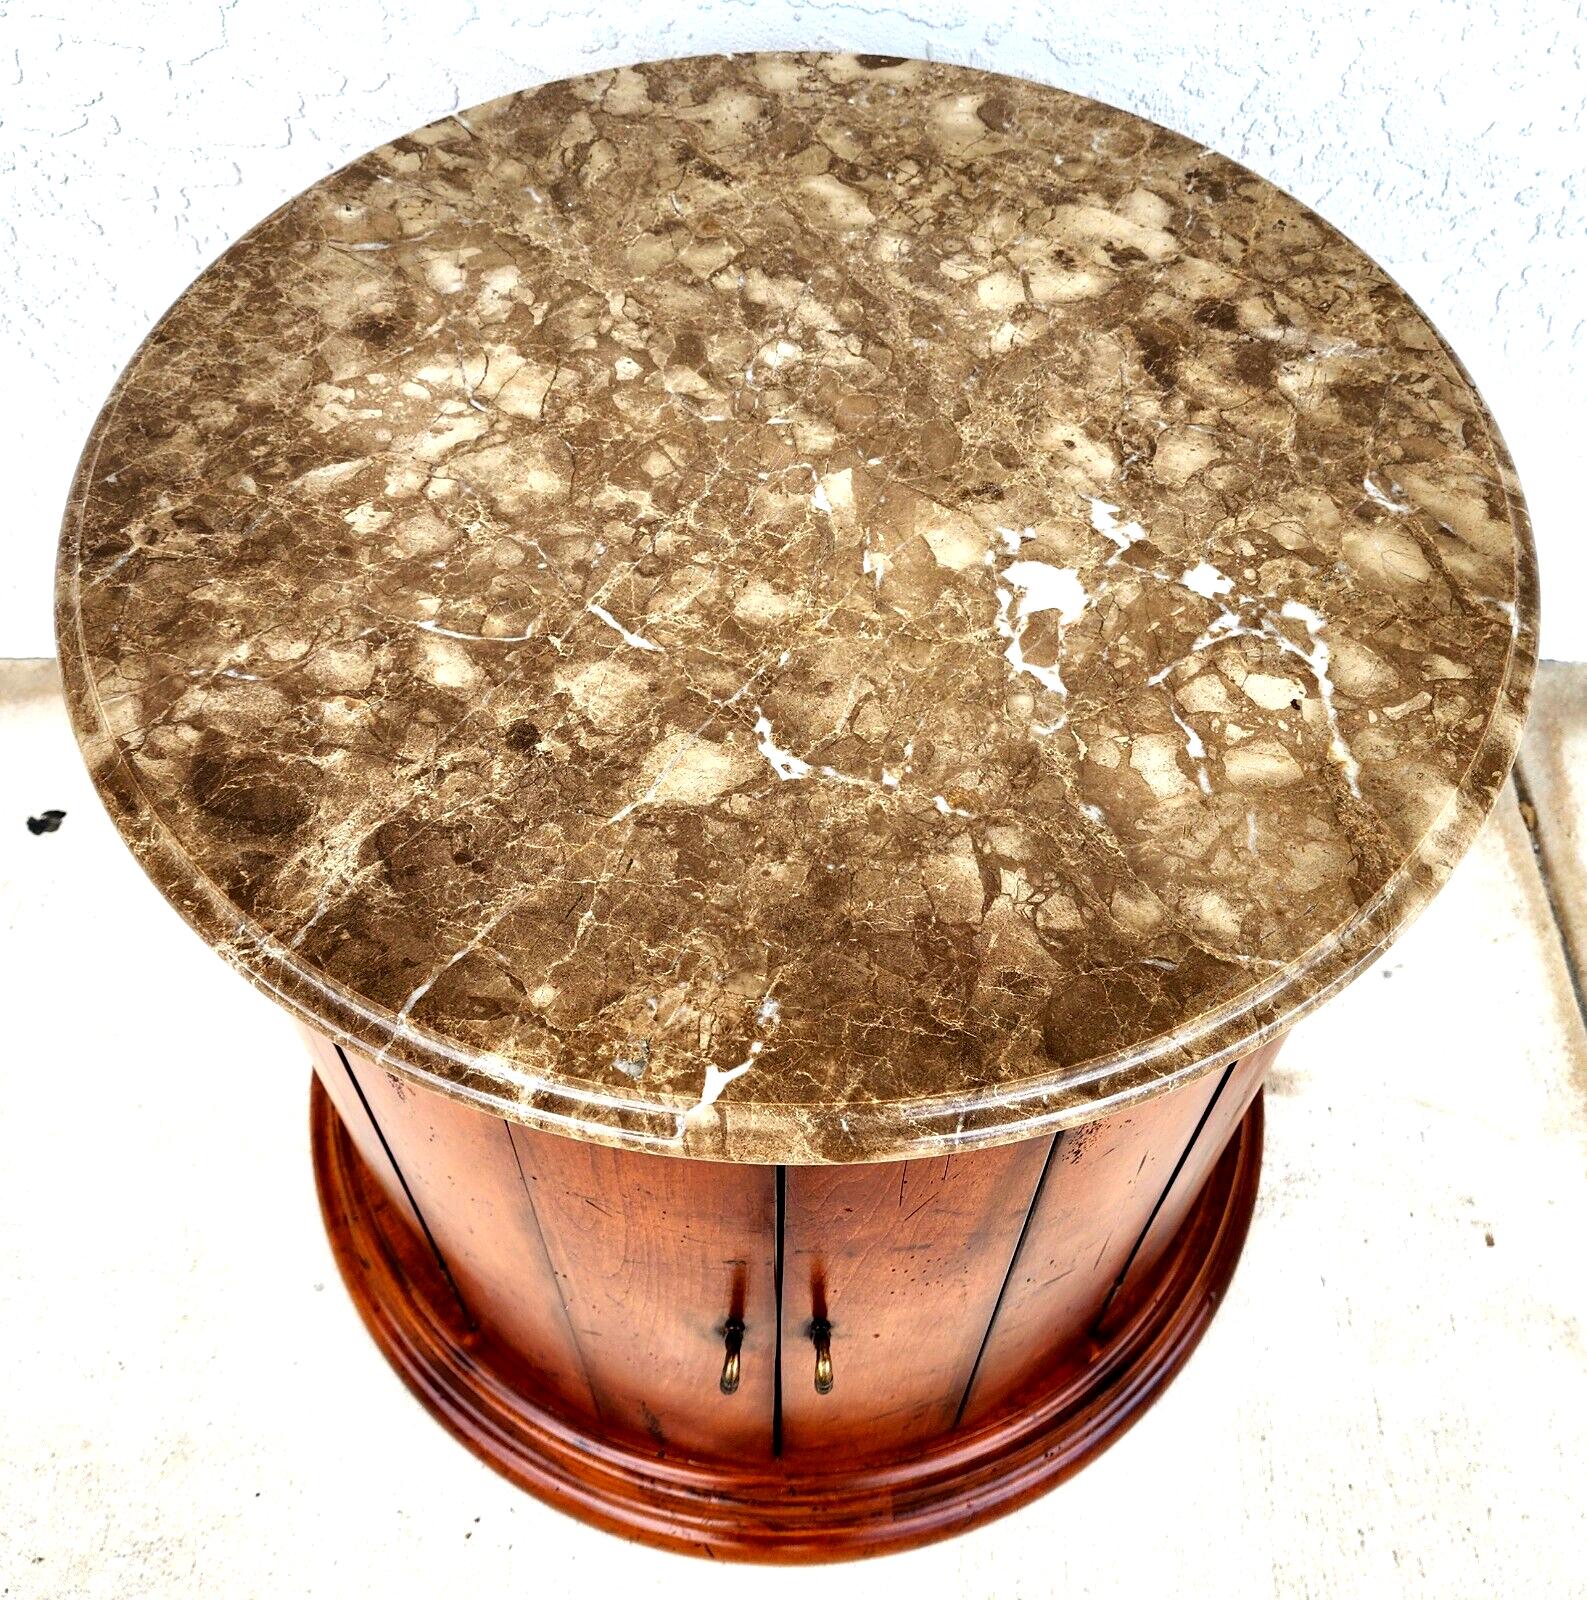 For FULL item description click on CONTINUE READING at the bottom of this page.

Offering One Of Our Recent Palm Beach Estate Fine Furniture Acquisitions Of A
Wonderful Henredon Style Marble Top Drum Table
This is a very well-built and solid piece